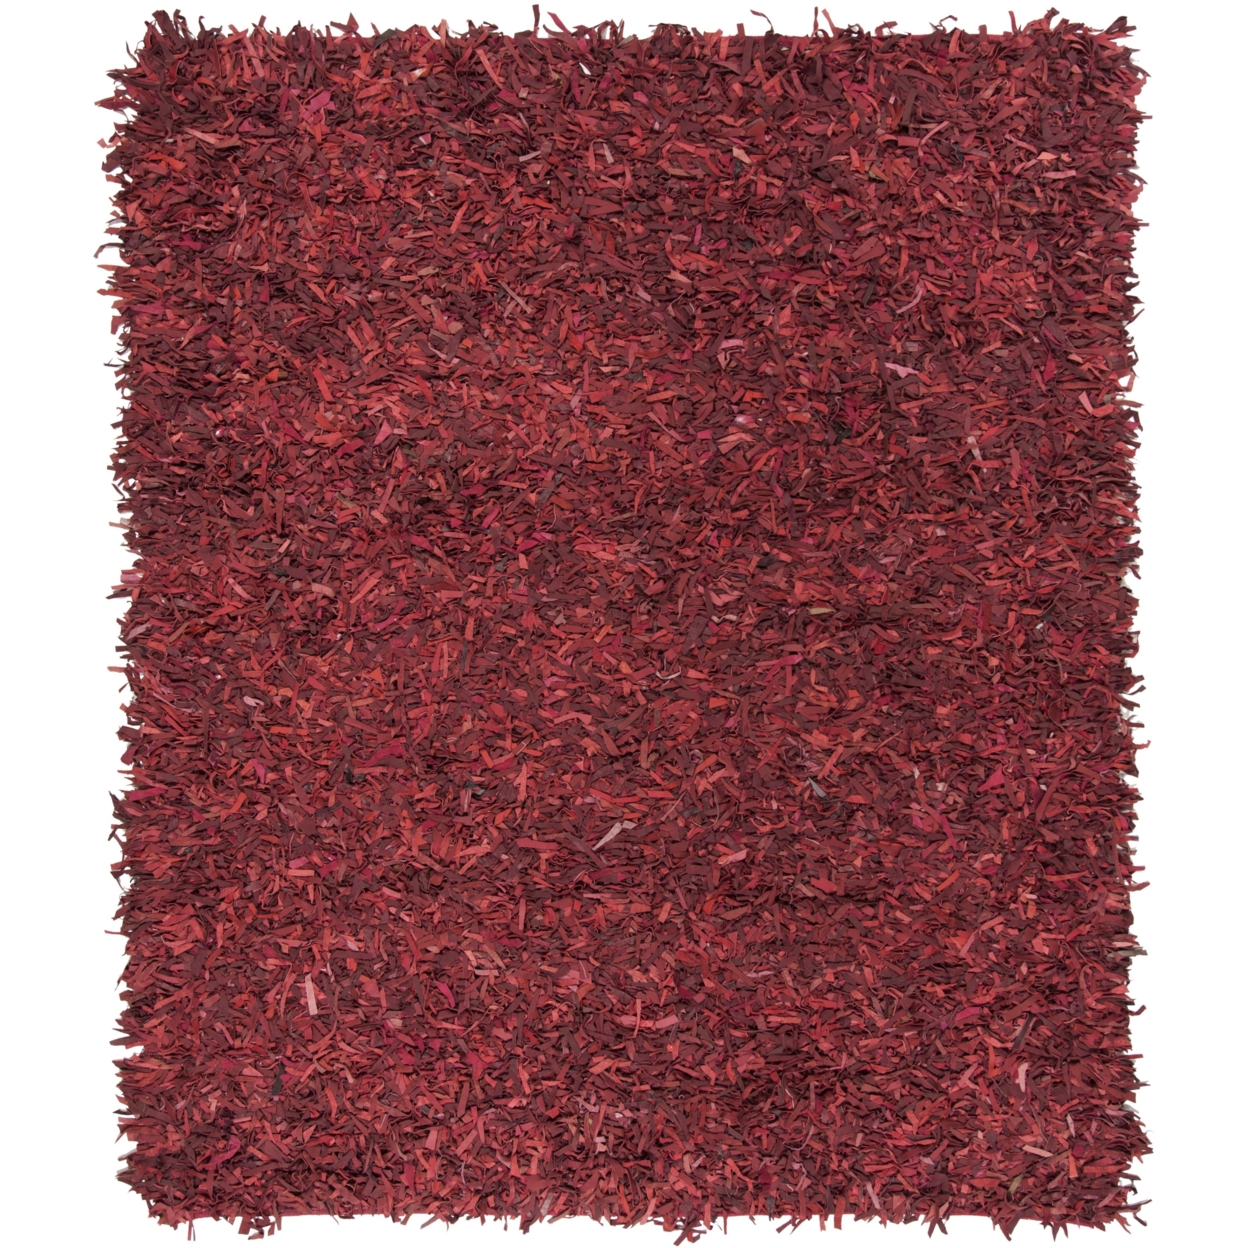 SAFAVIEH Leather Shag LSG601D Hand-knotted Red Rug - 8' X 10'